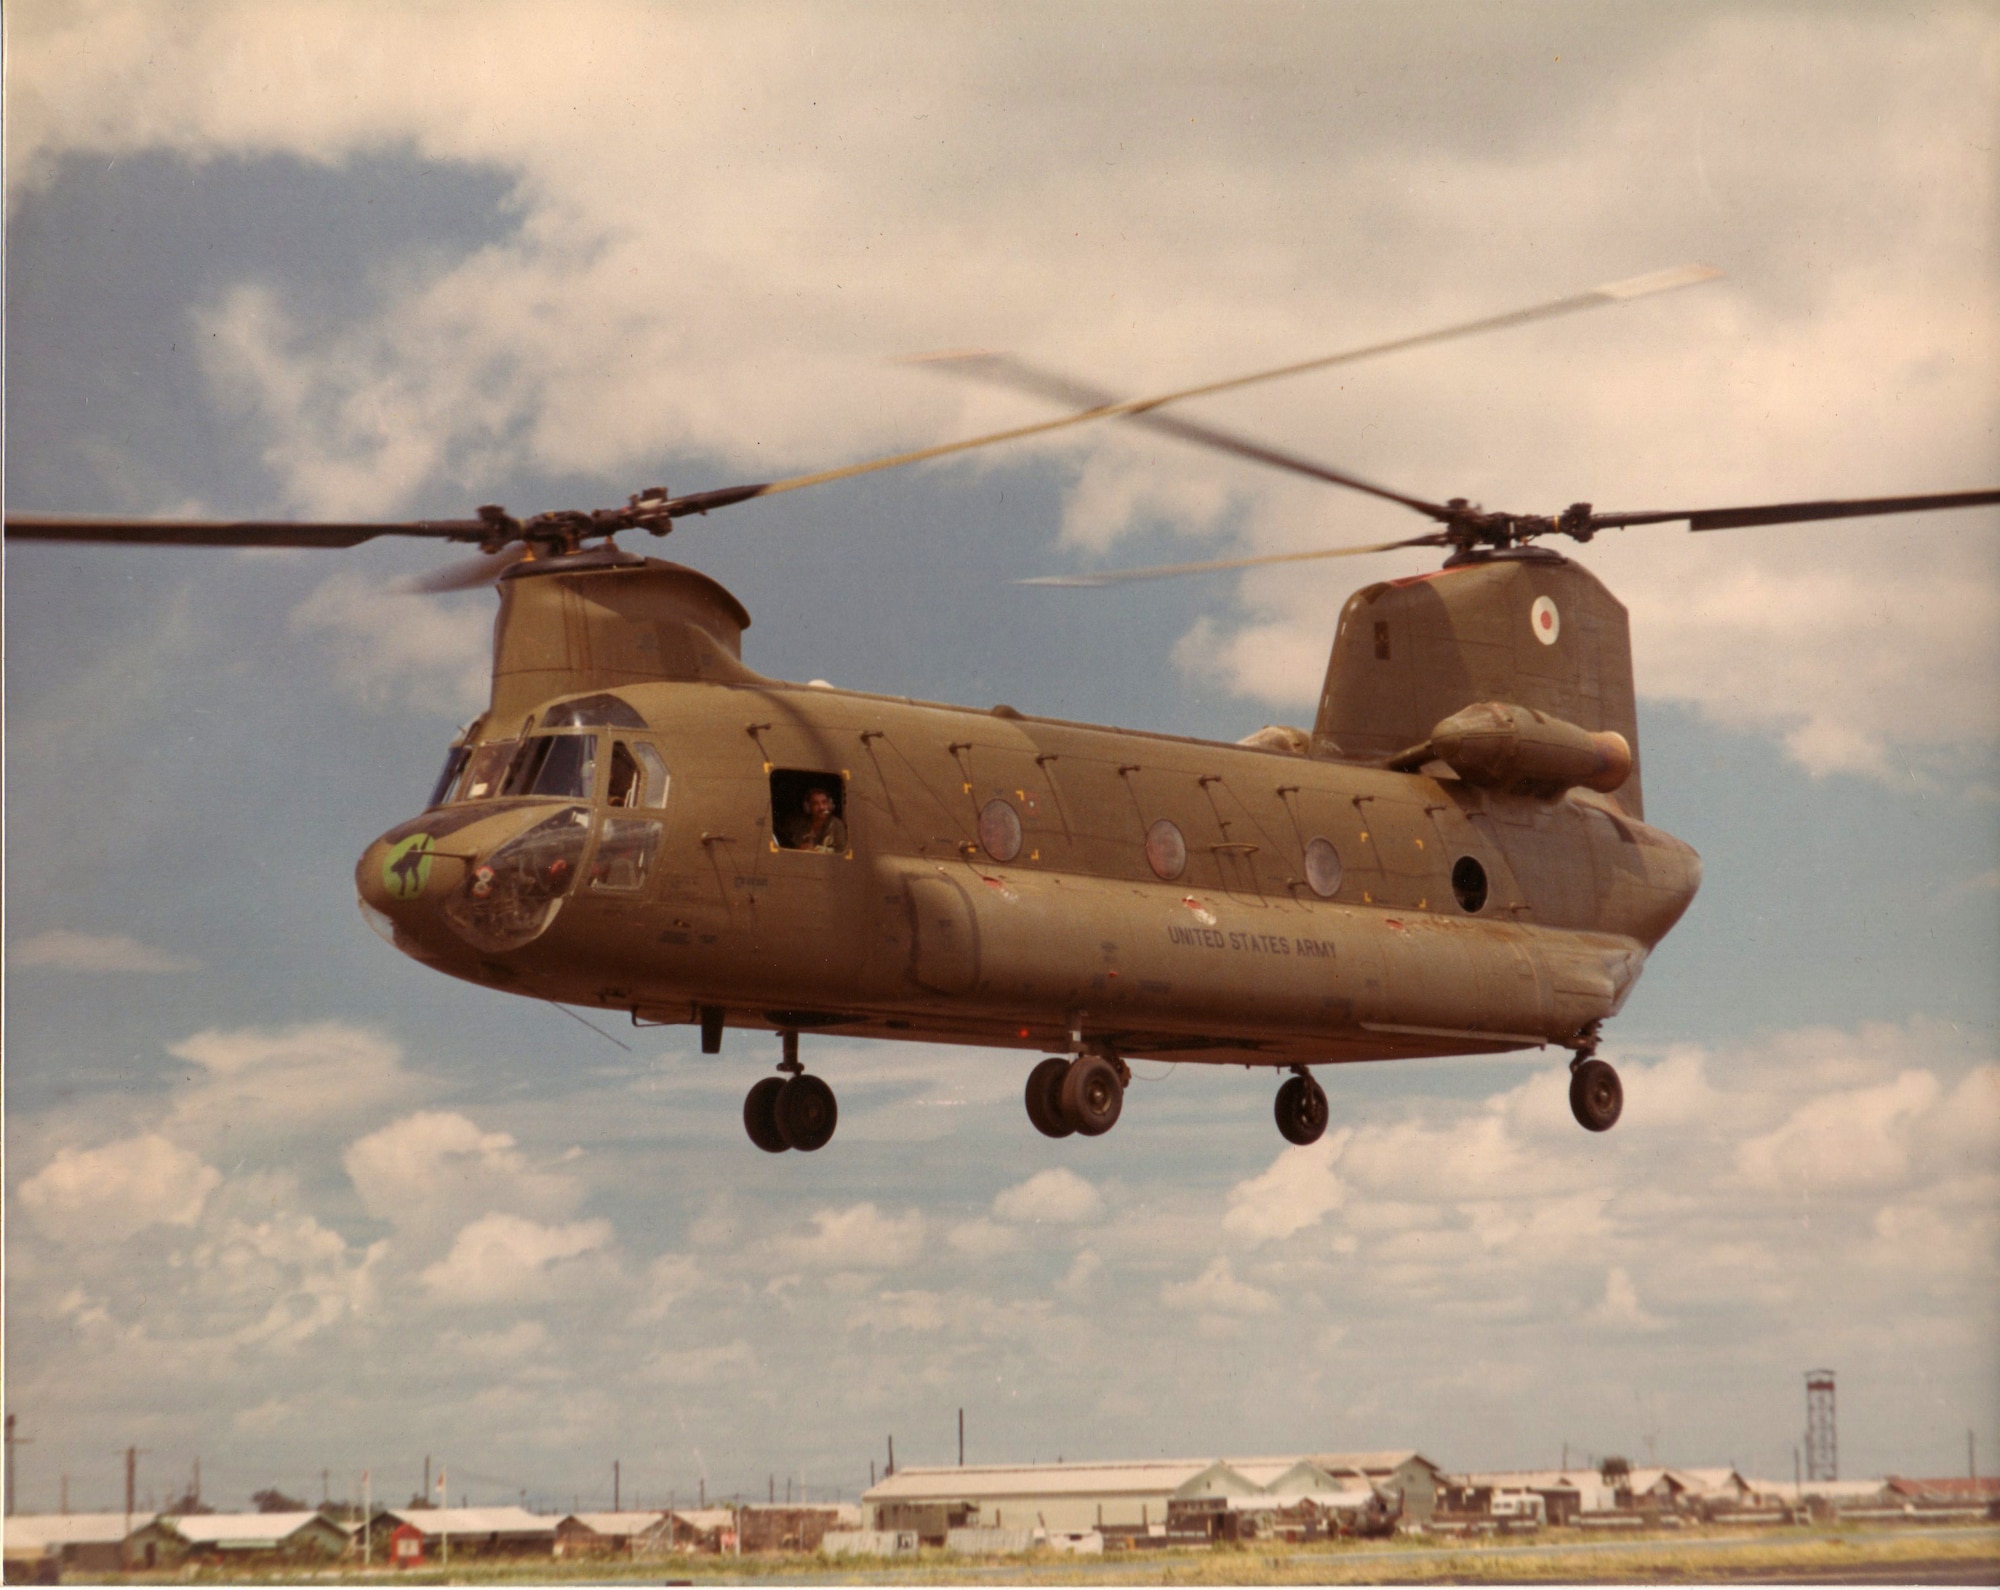 A Boeing Vertol CH-47C Chinook helicopter of the U.S. Army’s Phu Loi-based 213th Assault Support Helicopter Company (ASHC), the “Black Cats” of the 114th Aviation Battalion, 1st Aviation Brigade, which was Spec/4 Rod Smith’s first unit in Vietnam .  When the 213th ASHC was disbanded in Vietnam in 1972, Smith was transferred to another unit which supported both UH-1 “Hueys” and Chinooks, the 120th Aviation Company, “The Deans” of the 145th Aviation Battalion, 1st Aviation Brigade, at Long Bien.  (Courtesy Rod Smith)